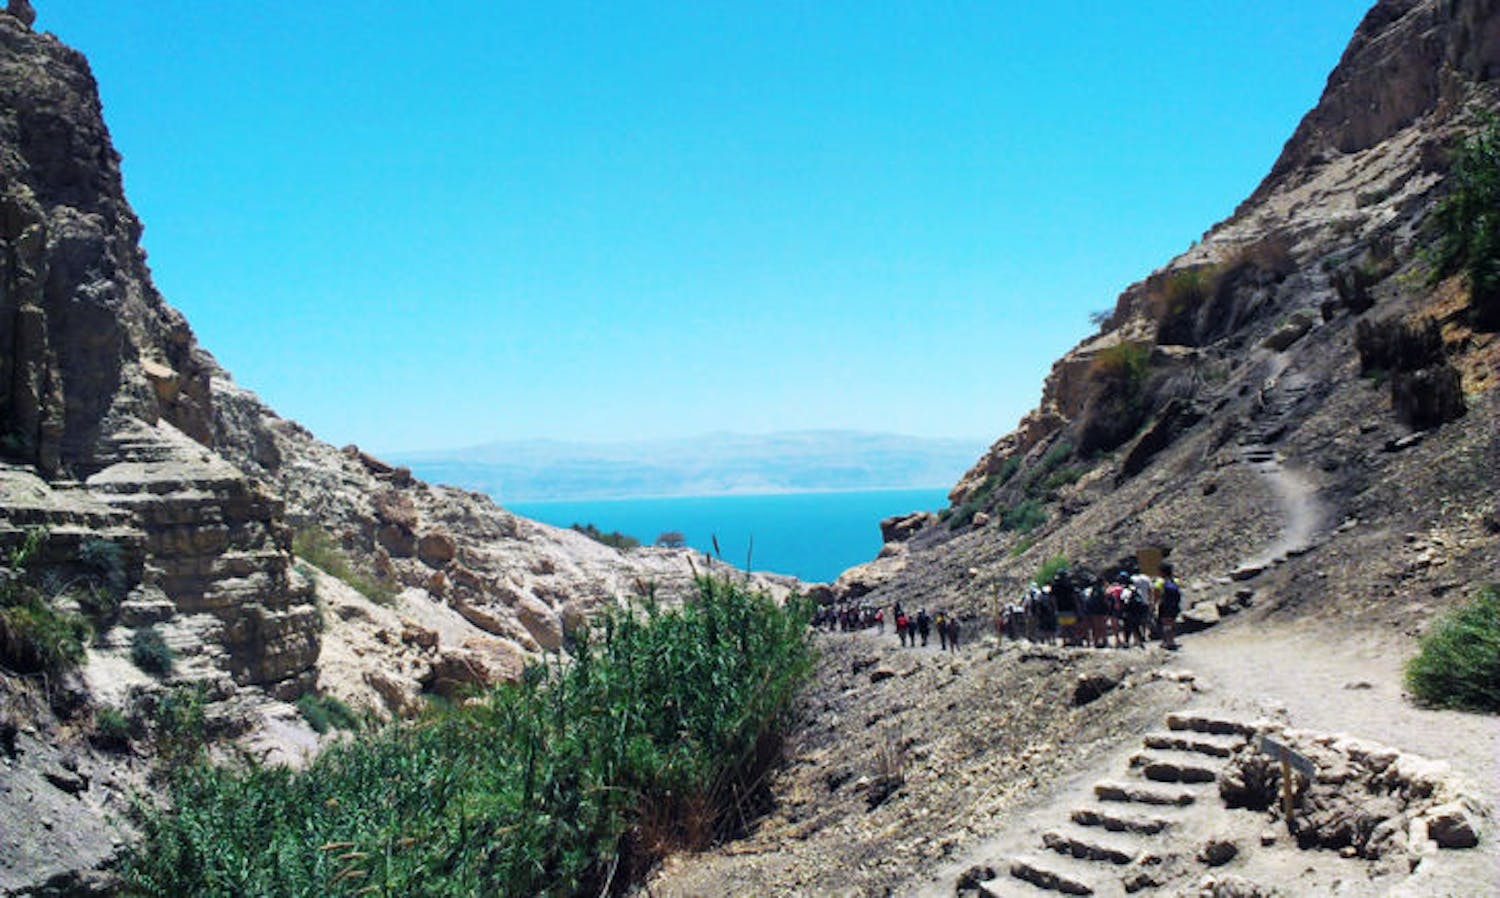 A group of UF students hikes in the Ein Gedi Nature Reserve, located near Israel’s Dead Sea, during a Birthright trip in May. UF Hillel takes Jewish students on the free, 10-day trip in the winter and summer.